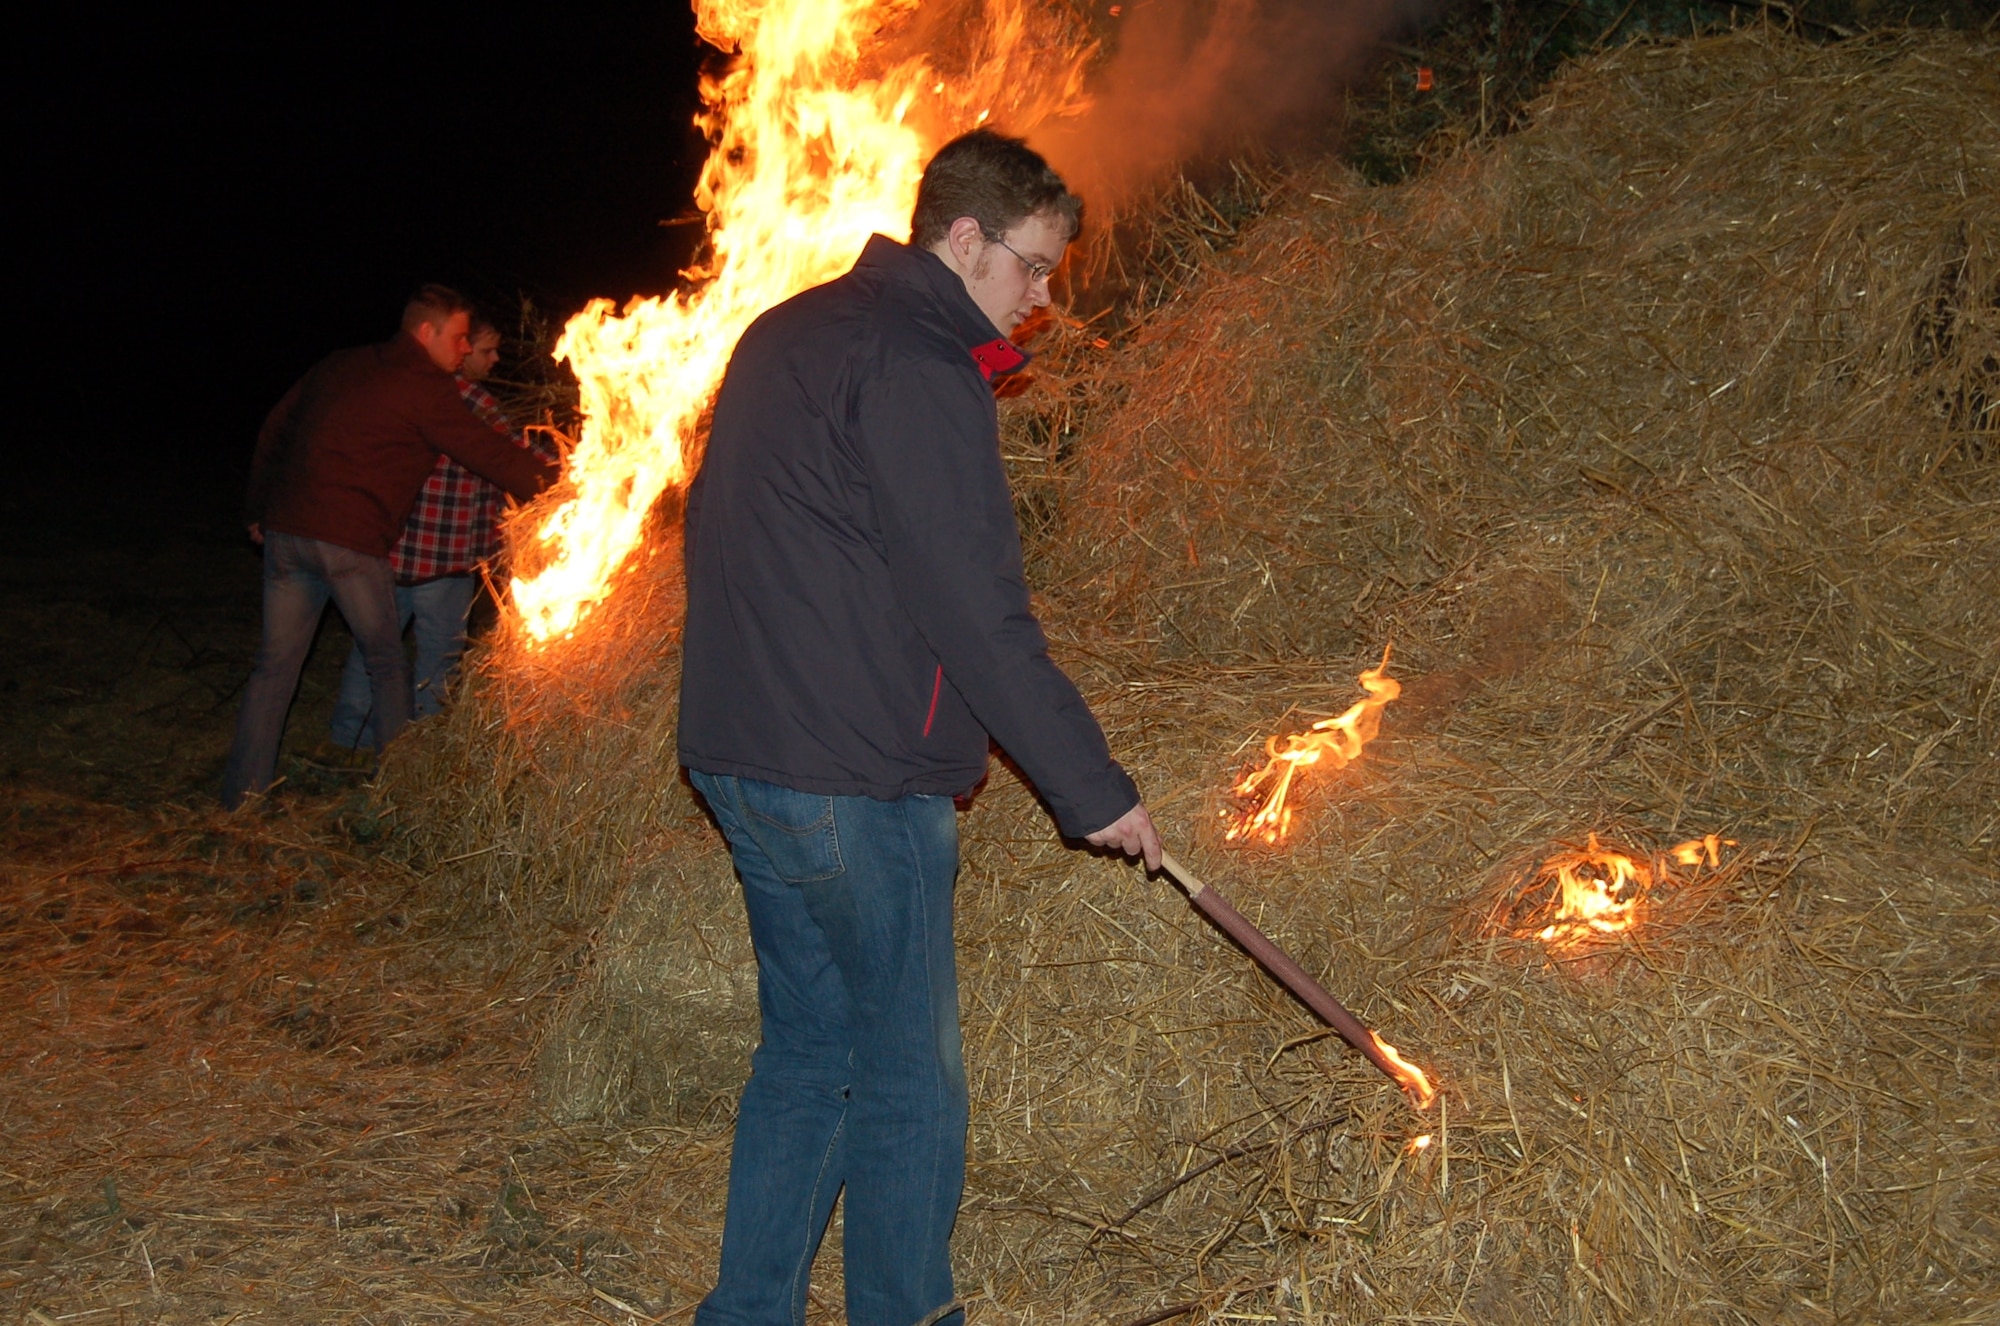 PREIST, Germany -- A local teenager lights a “Huetten” bonfire during the 2008 Lent festivities in the Eifel community of Preist. Eifel tradition says winter spirits go away with the lighting of the fire allowing spring to arrive. (U.S. Air Force photo by Iris Reiff)